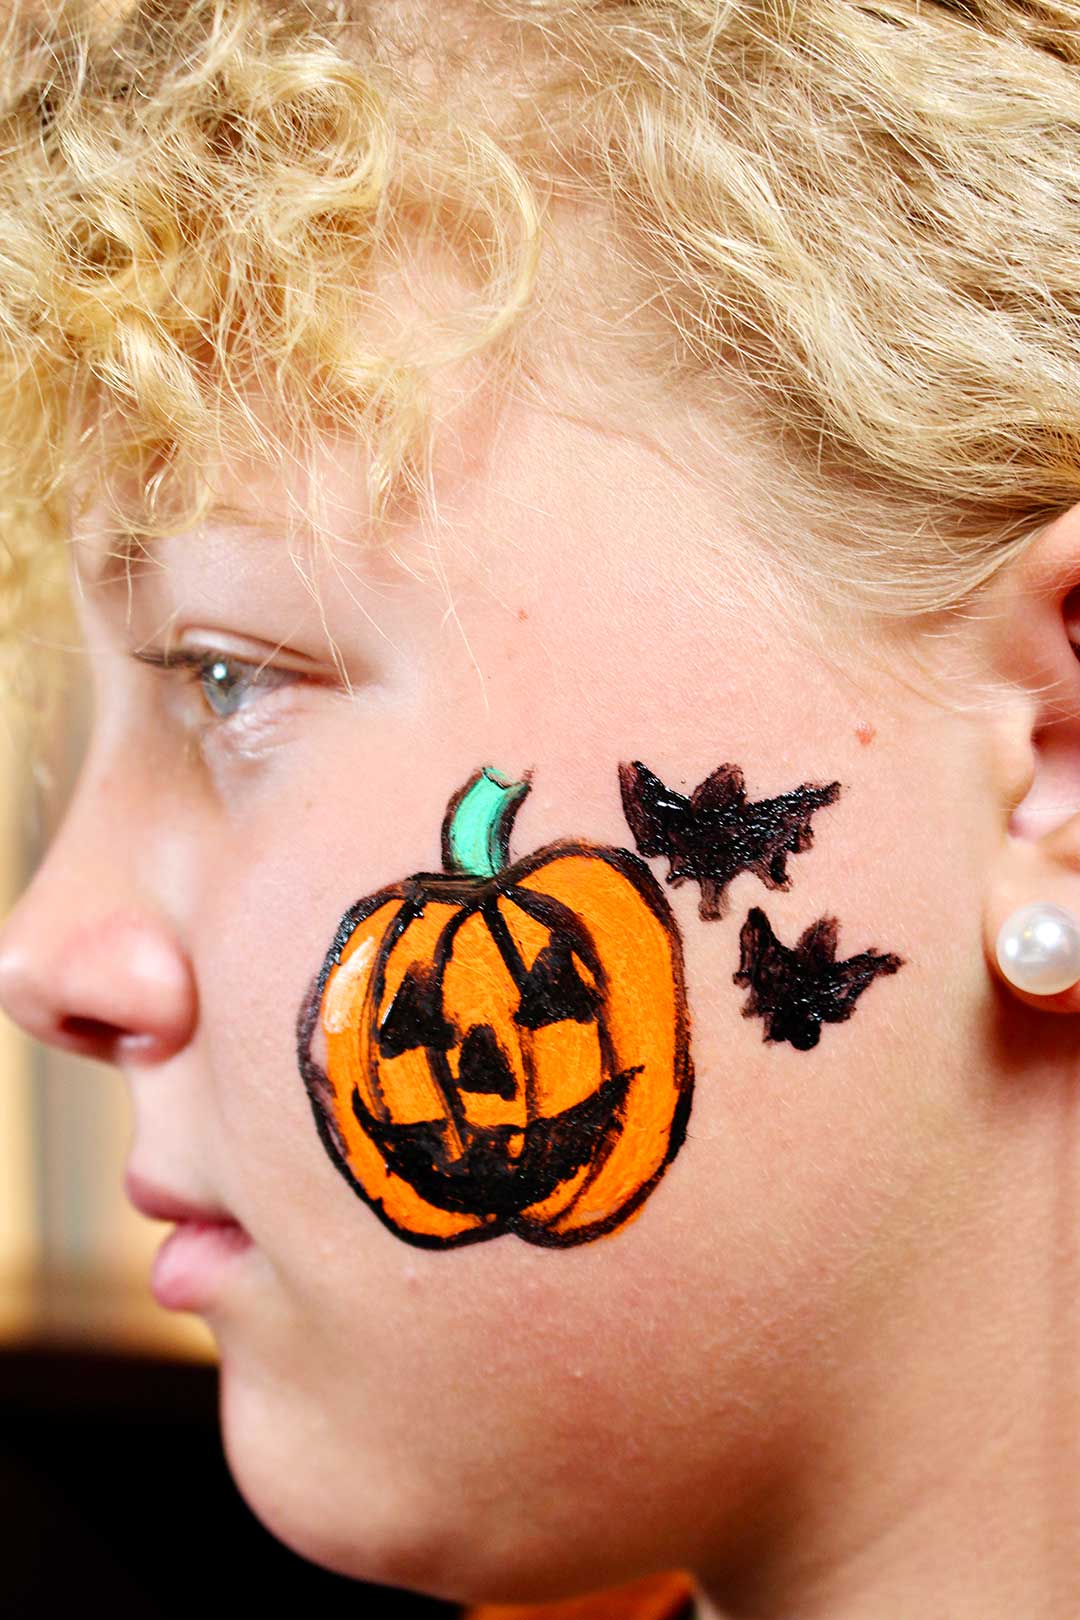 Profile of girl with finished jack-o-lantern and two black bats on cheek.